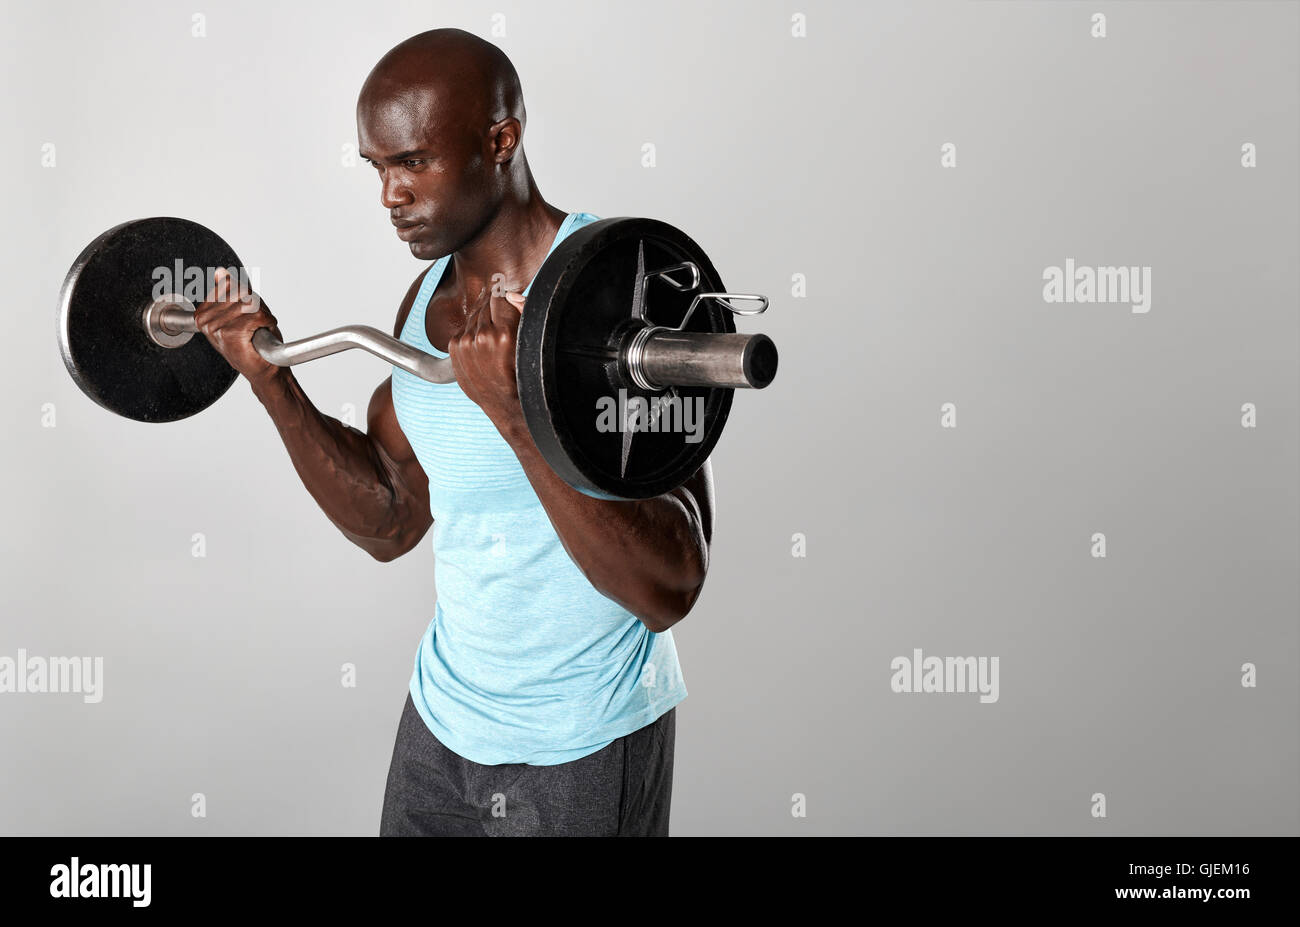 Portrait of young fit man lifting barbell against grey background. Young muscular man exercising with weights. Stock Photo